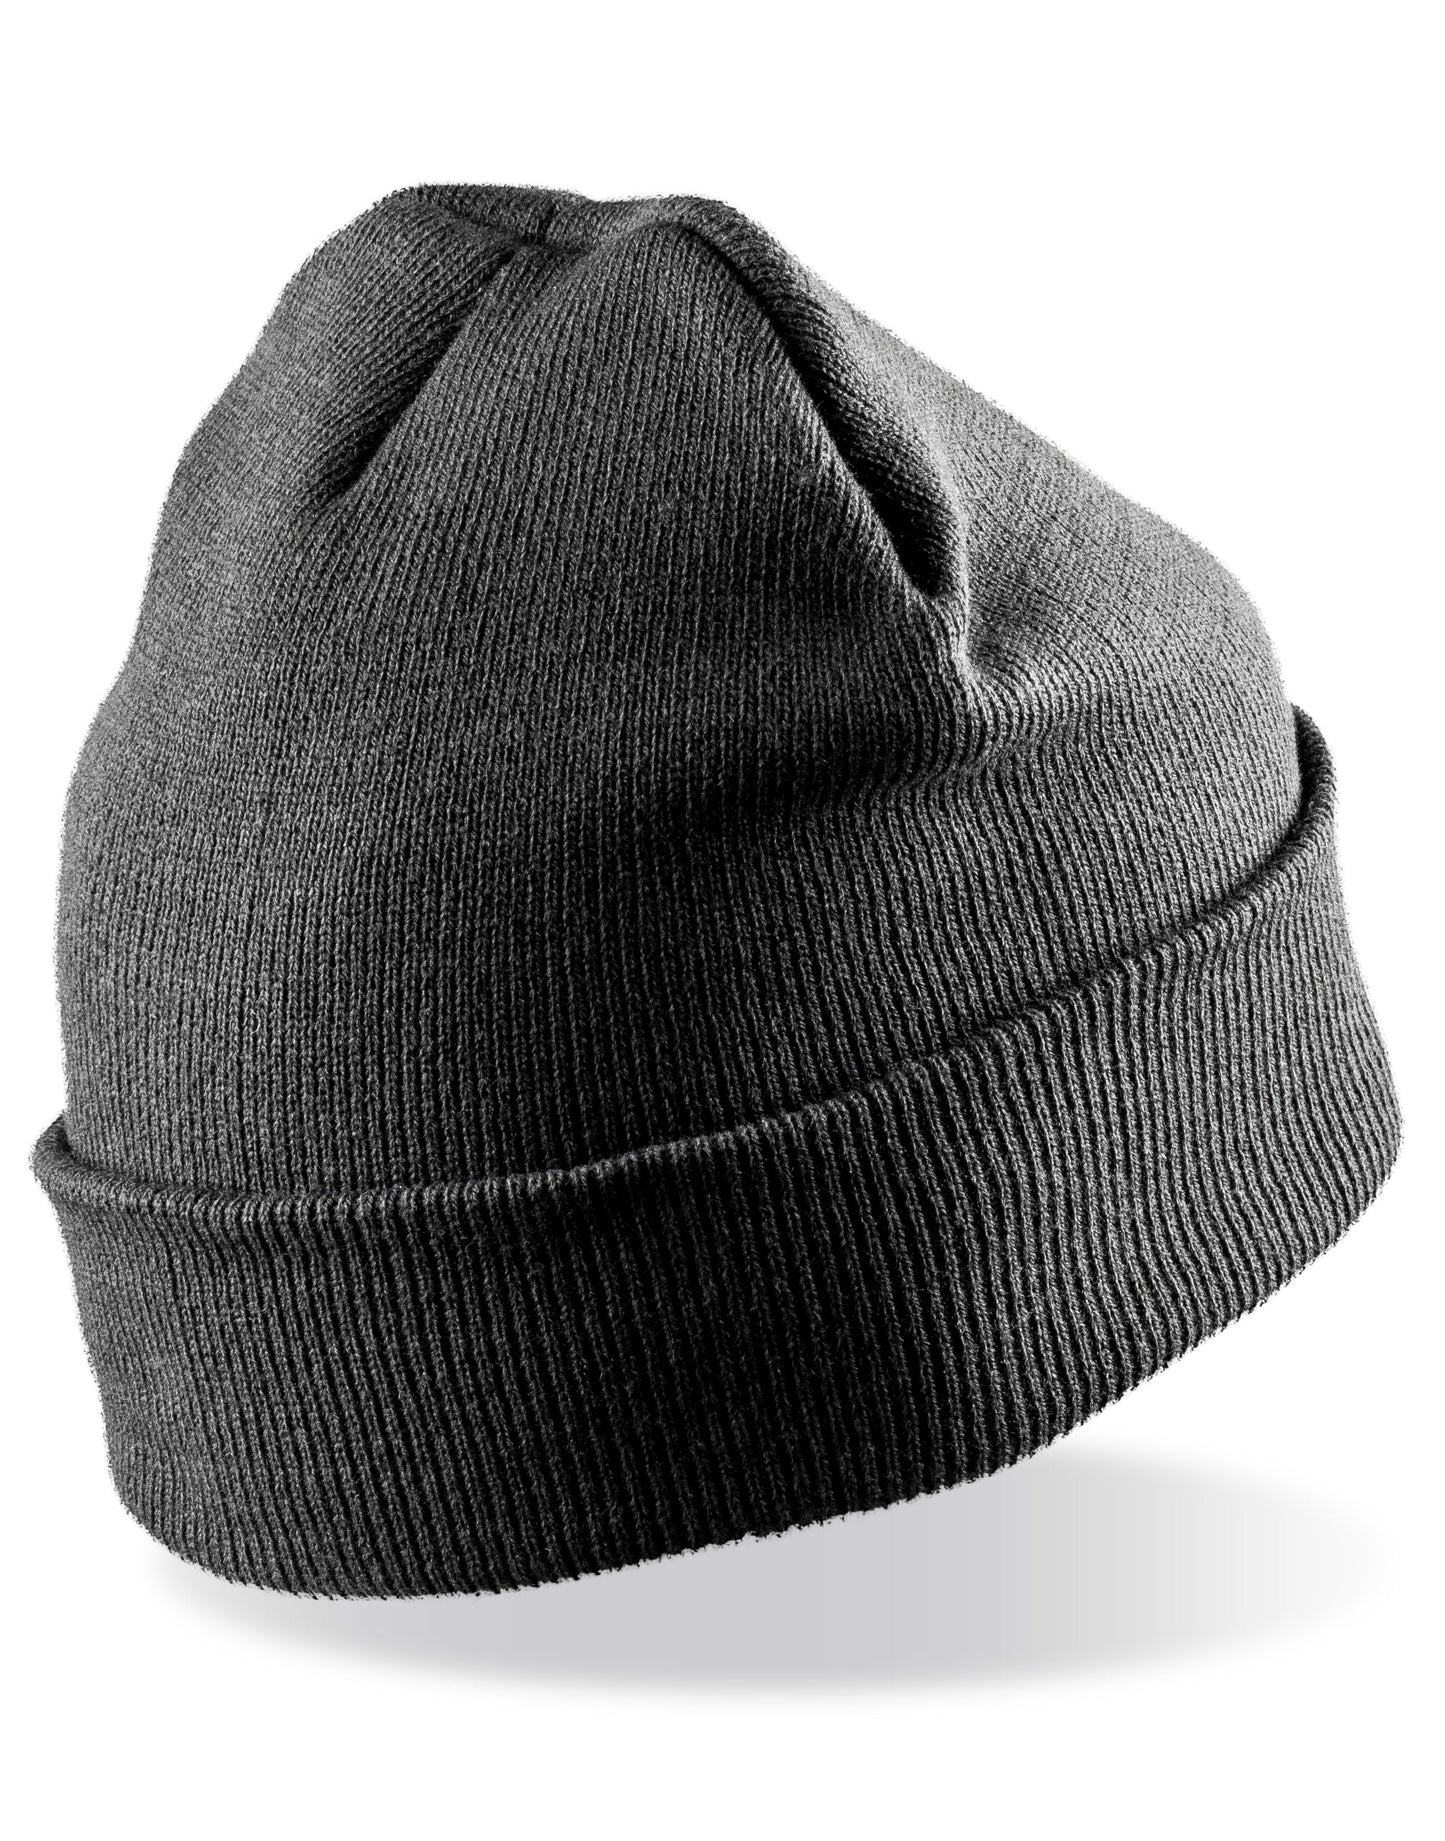 Result Winter Double Knit Printer Beanie